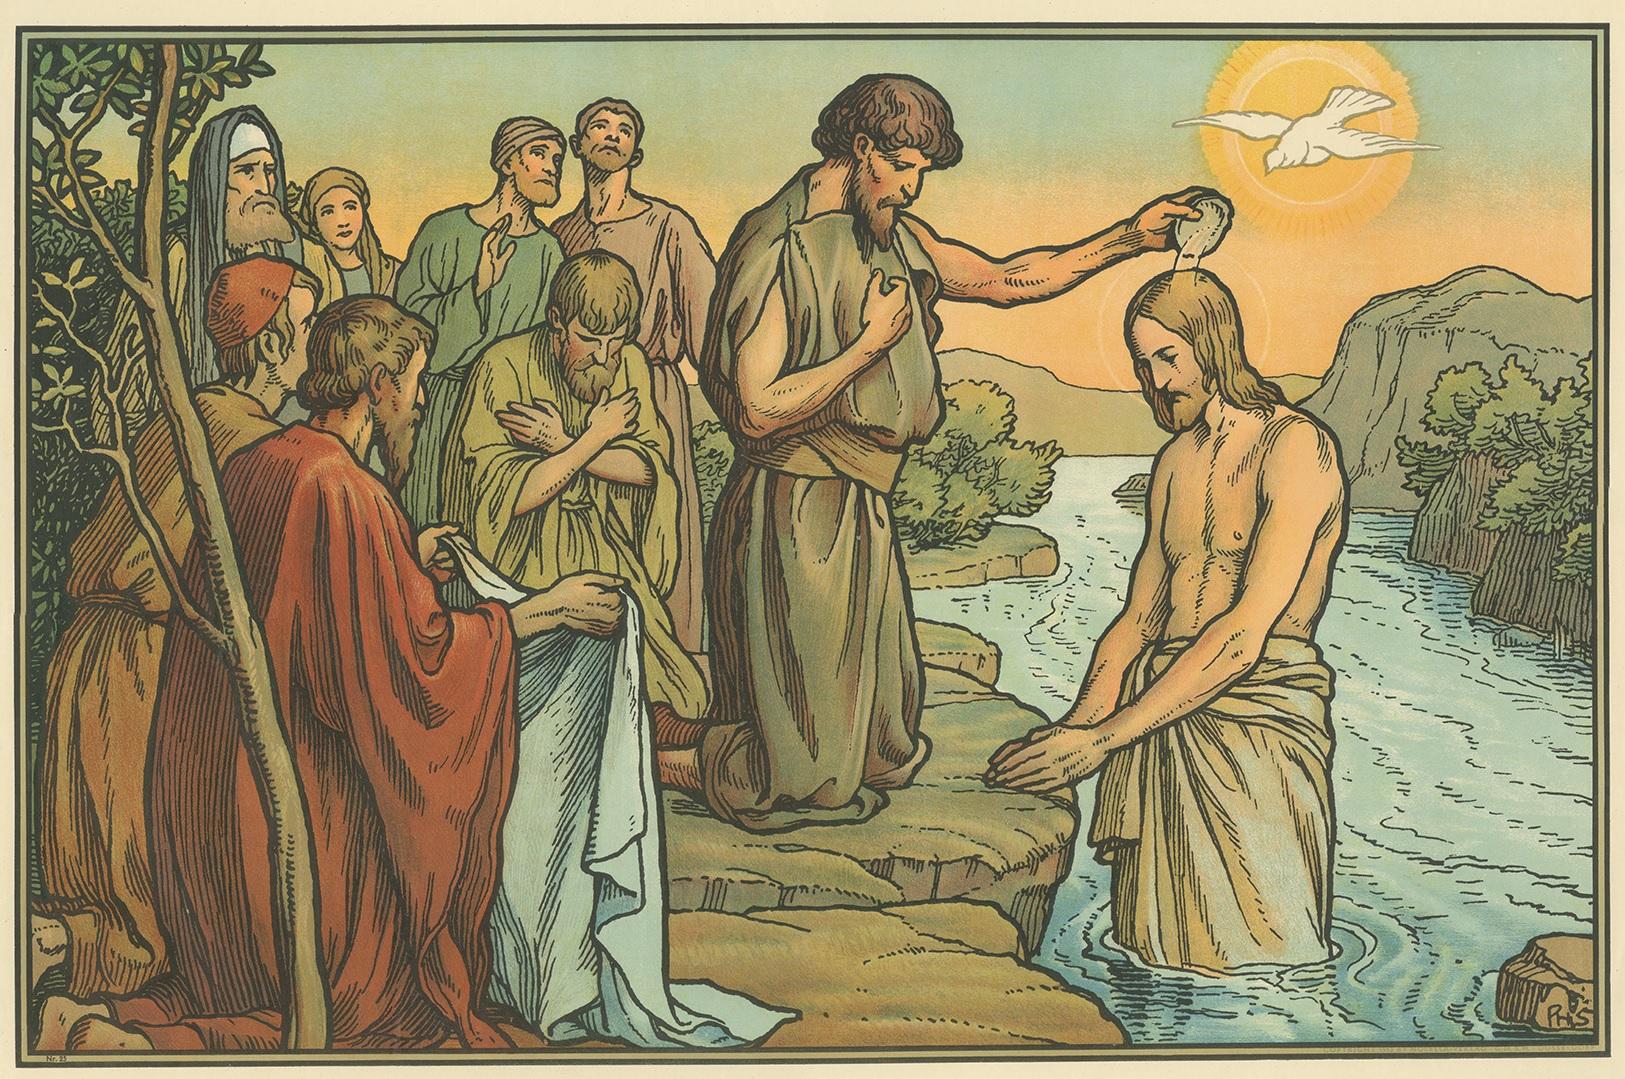 Large antique print of the Baptism of Jesus. Published by Mosella-Verlag, 1913. This print originates from a series titled 'Kathol. Schulbibelwerk von Dr. Ecker'.